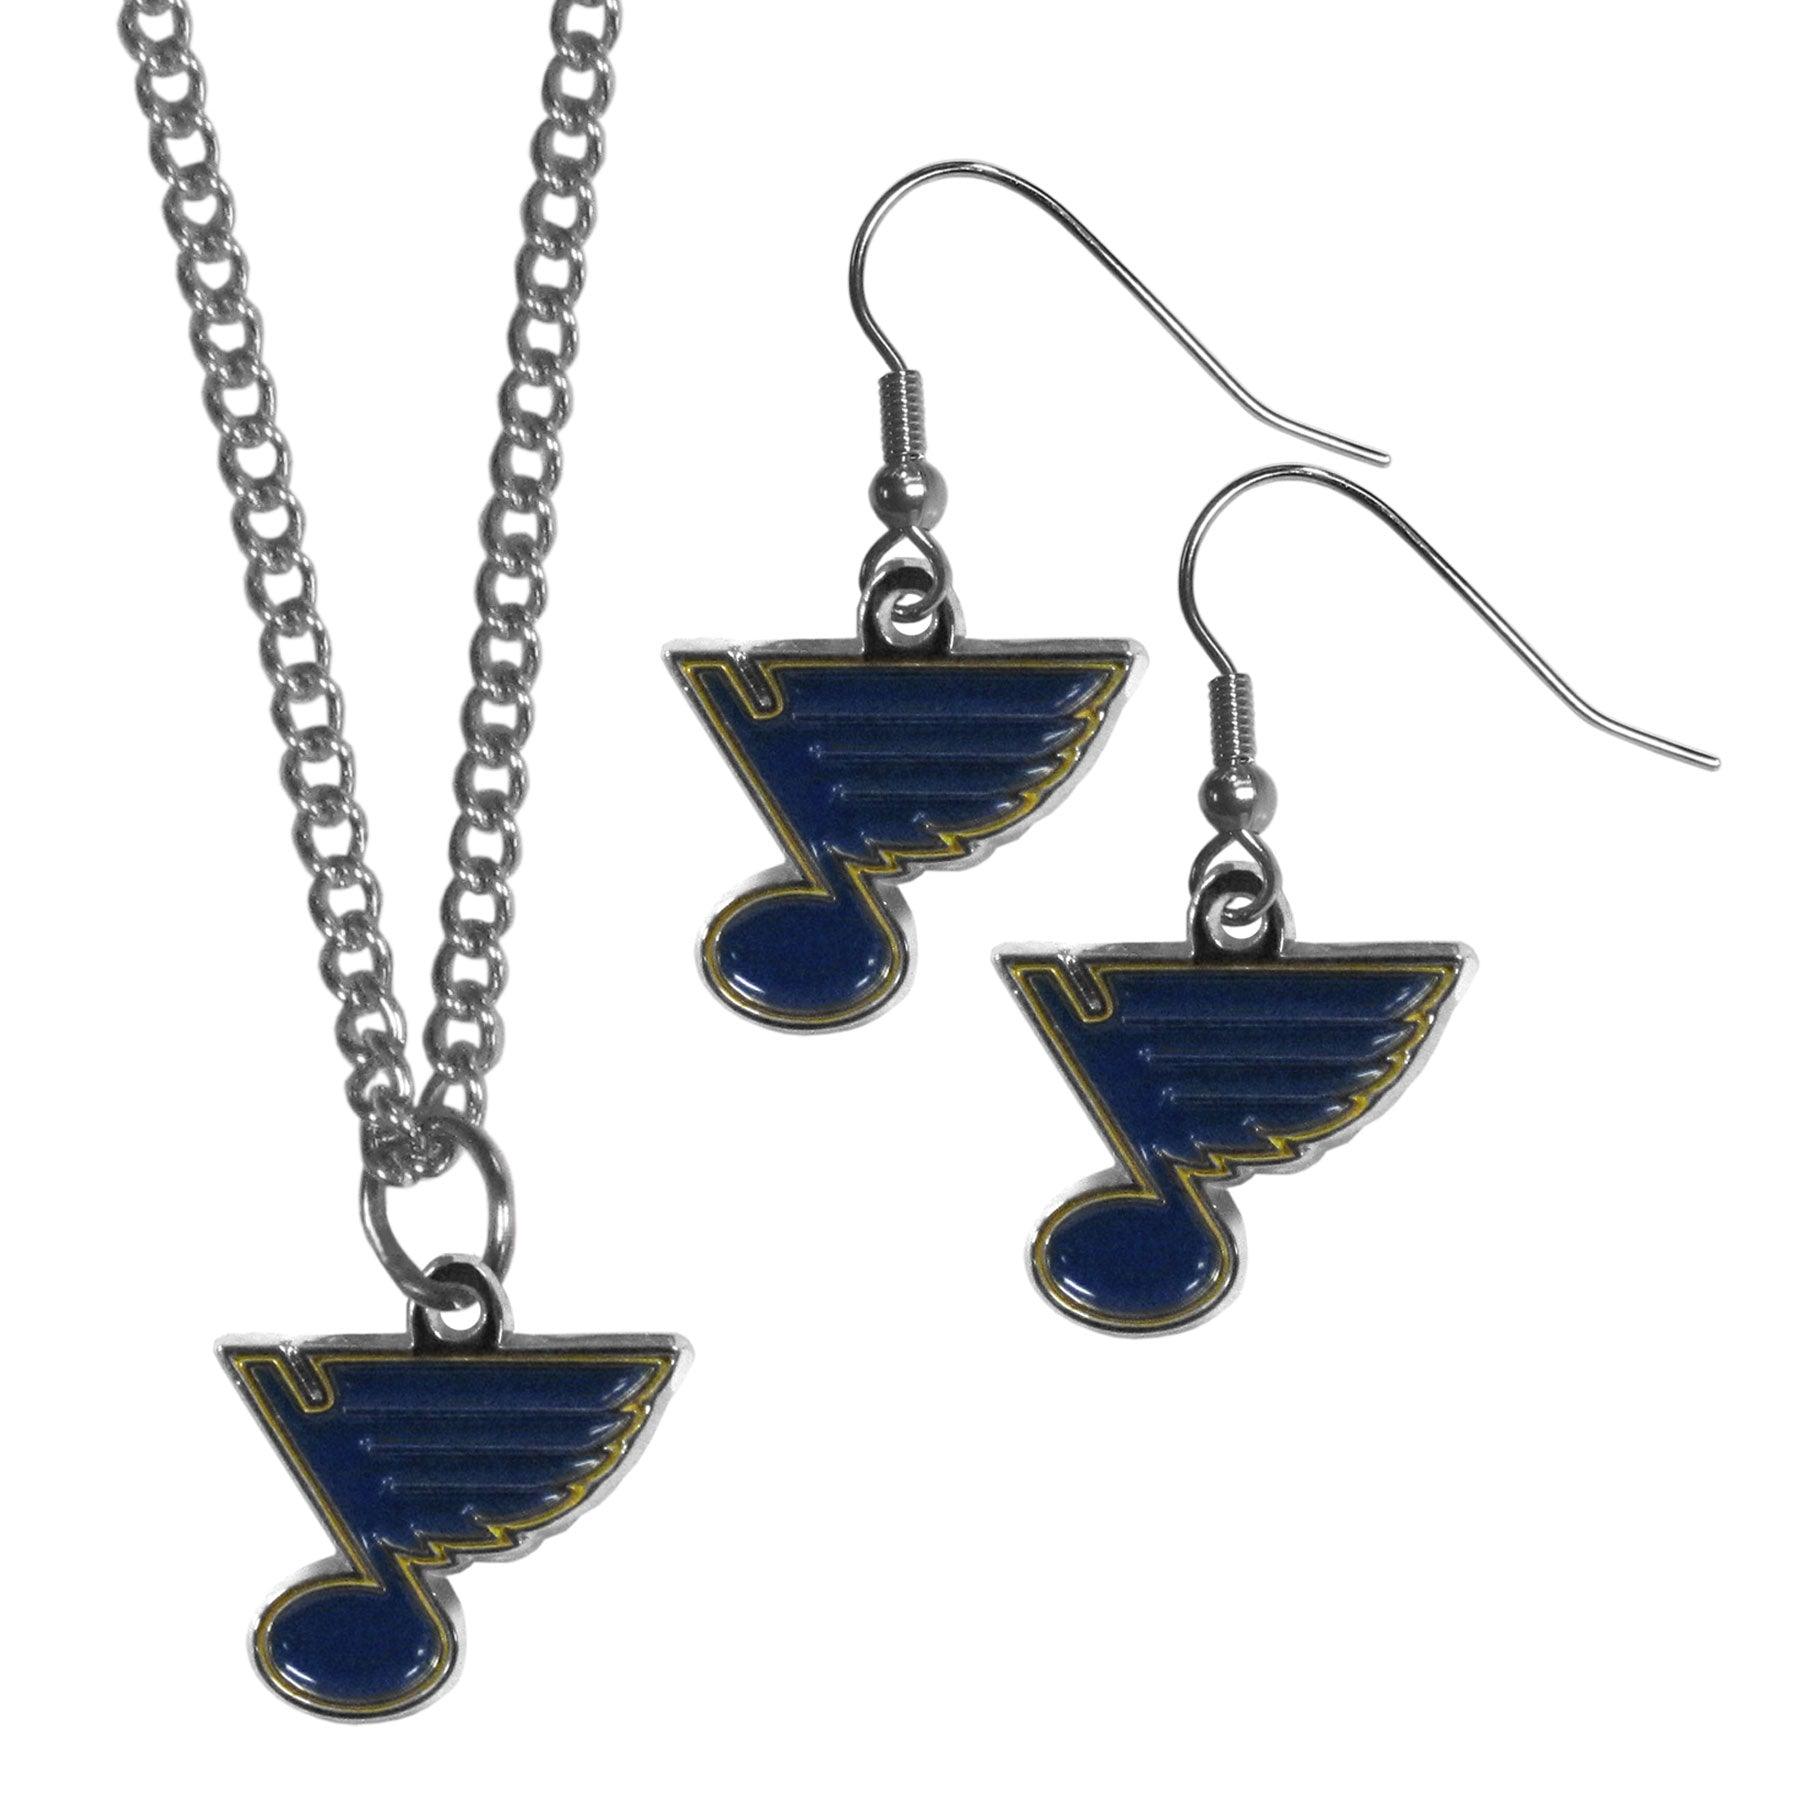 St. Louis Blues Dangle Earrings and Chain Necklace Set